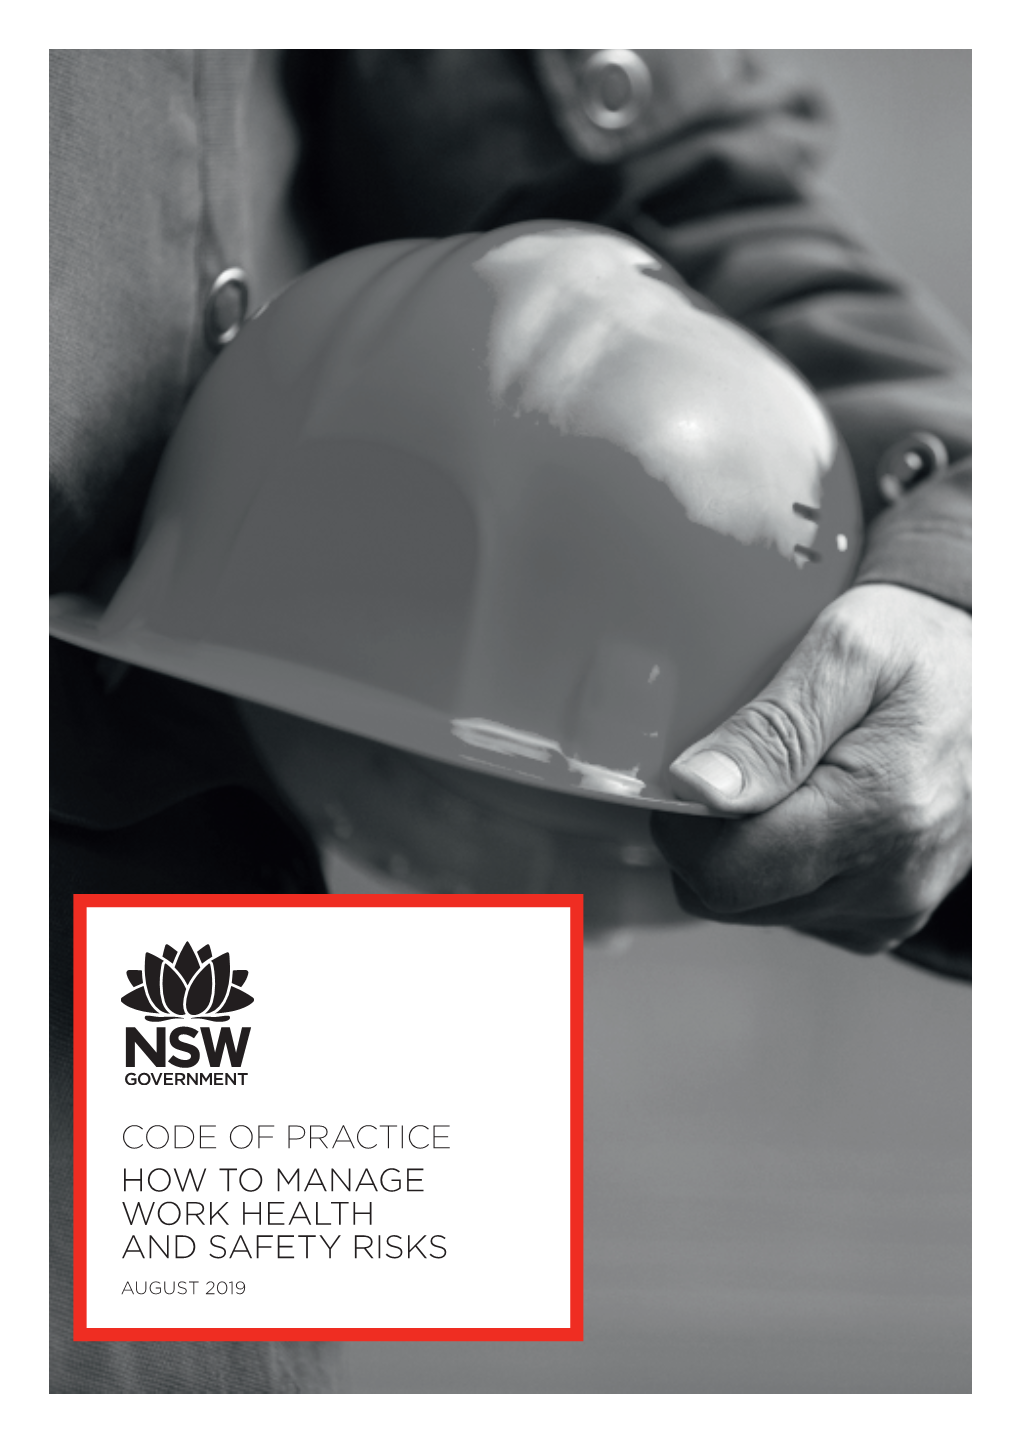 Code of Practice – How to Manage Work Health and Safety Risks